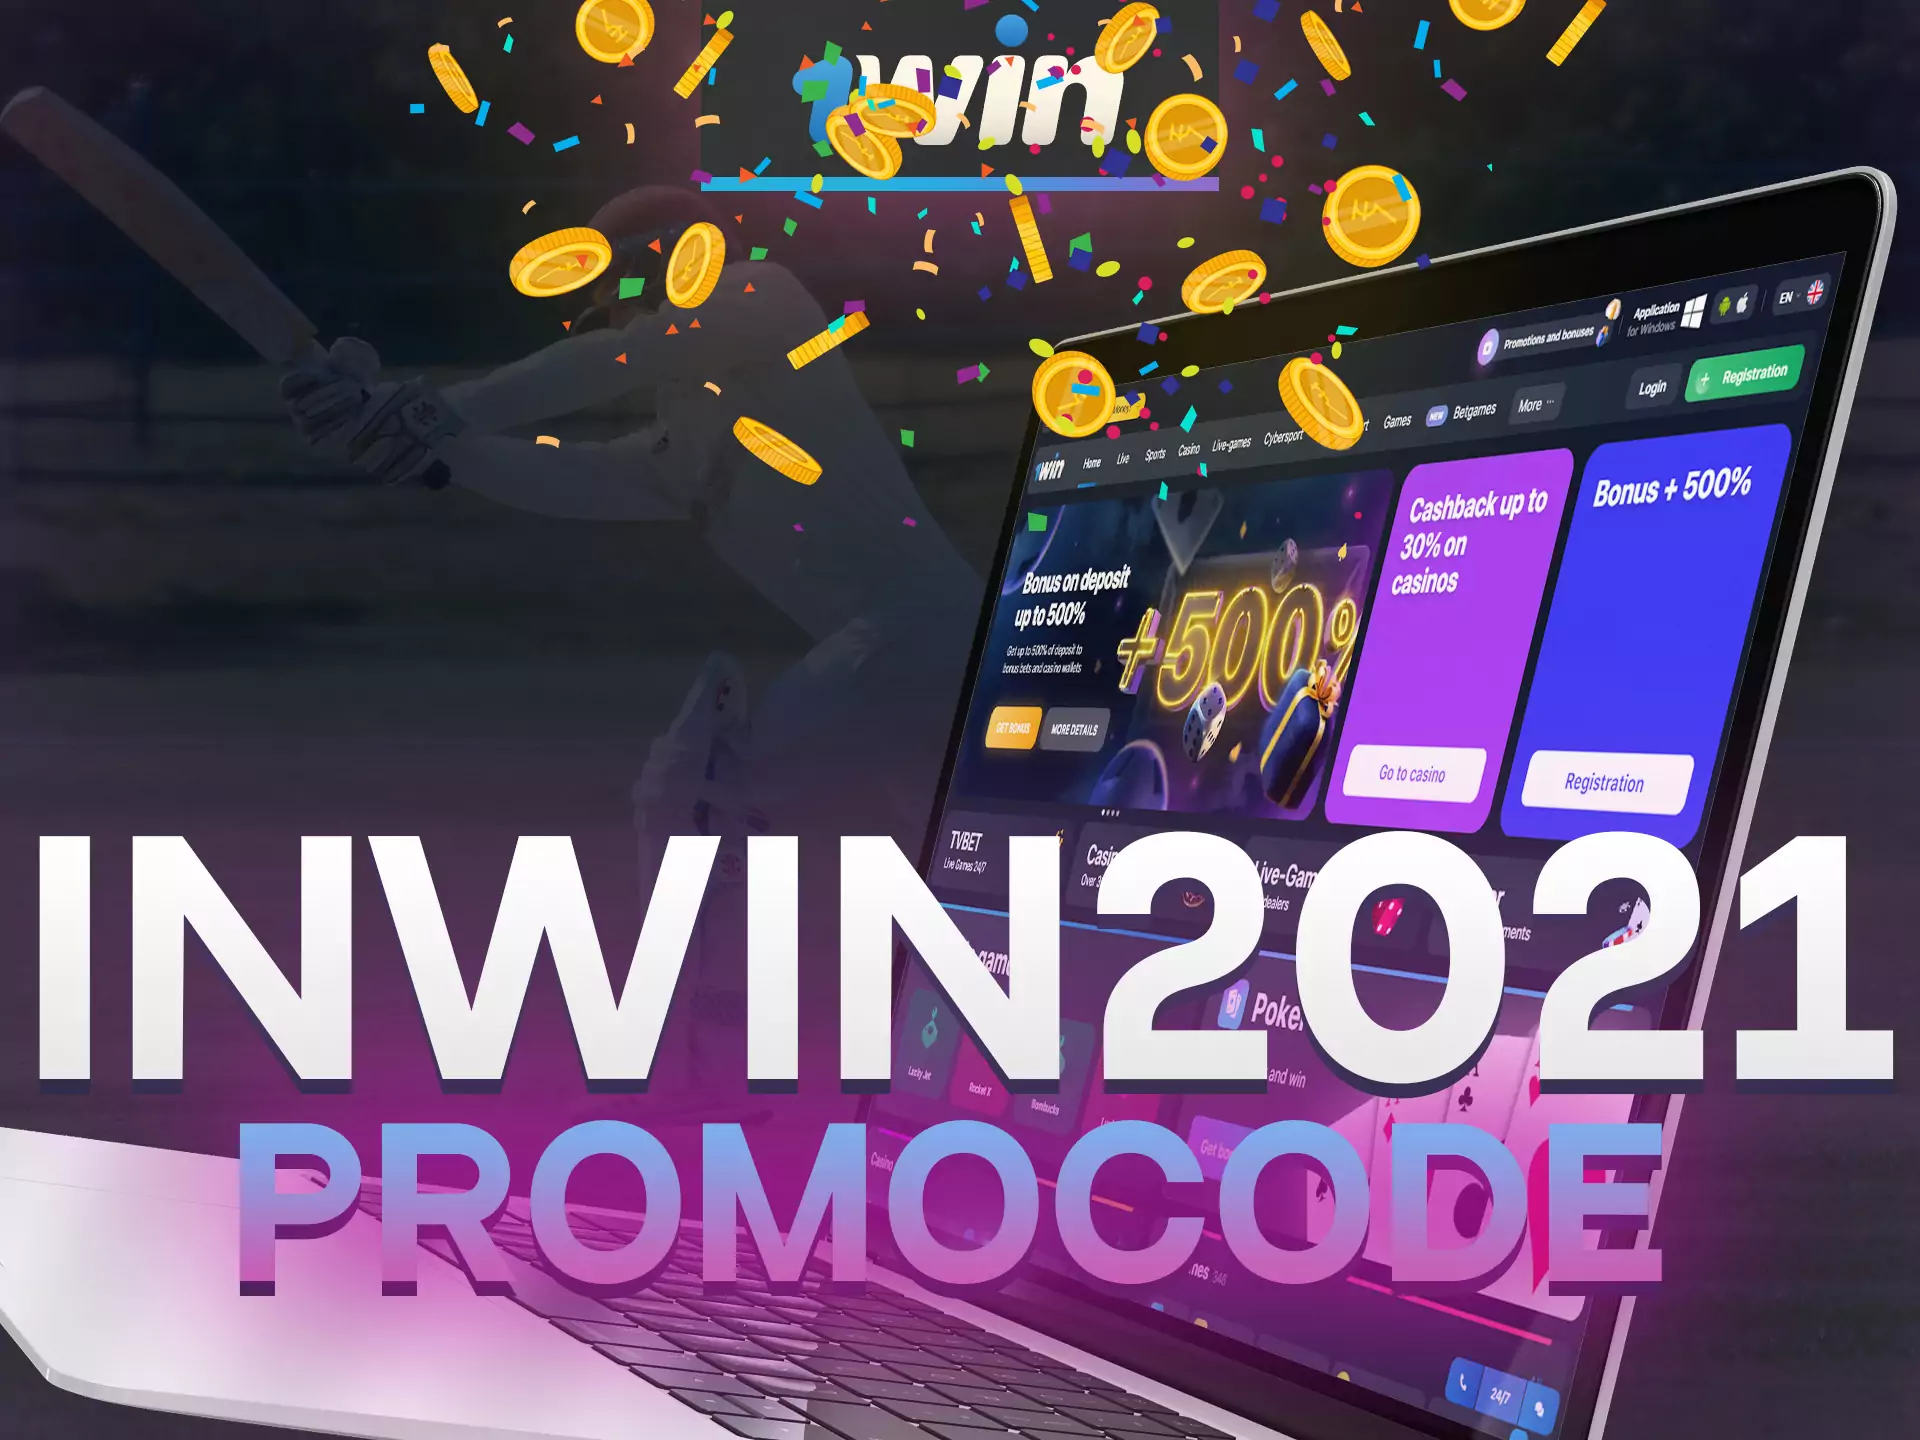 Enter special 1win promocode and get additional bonuses.